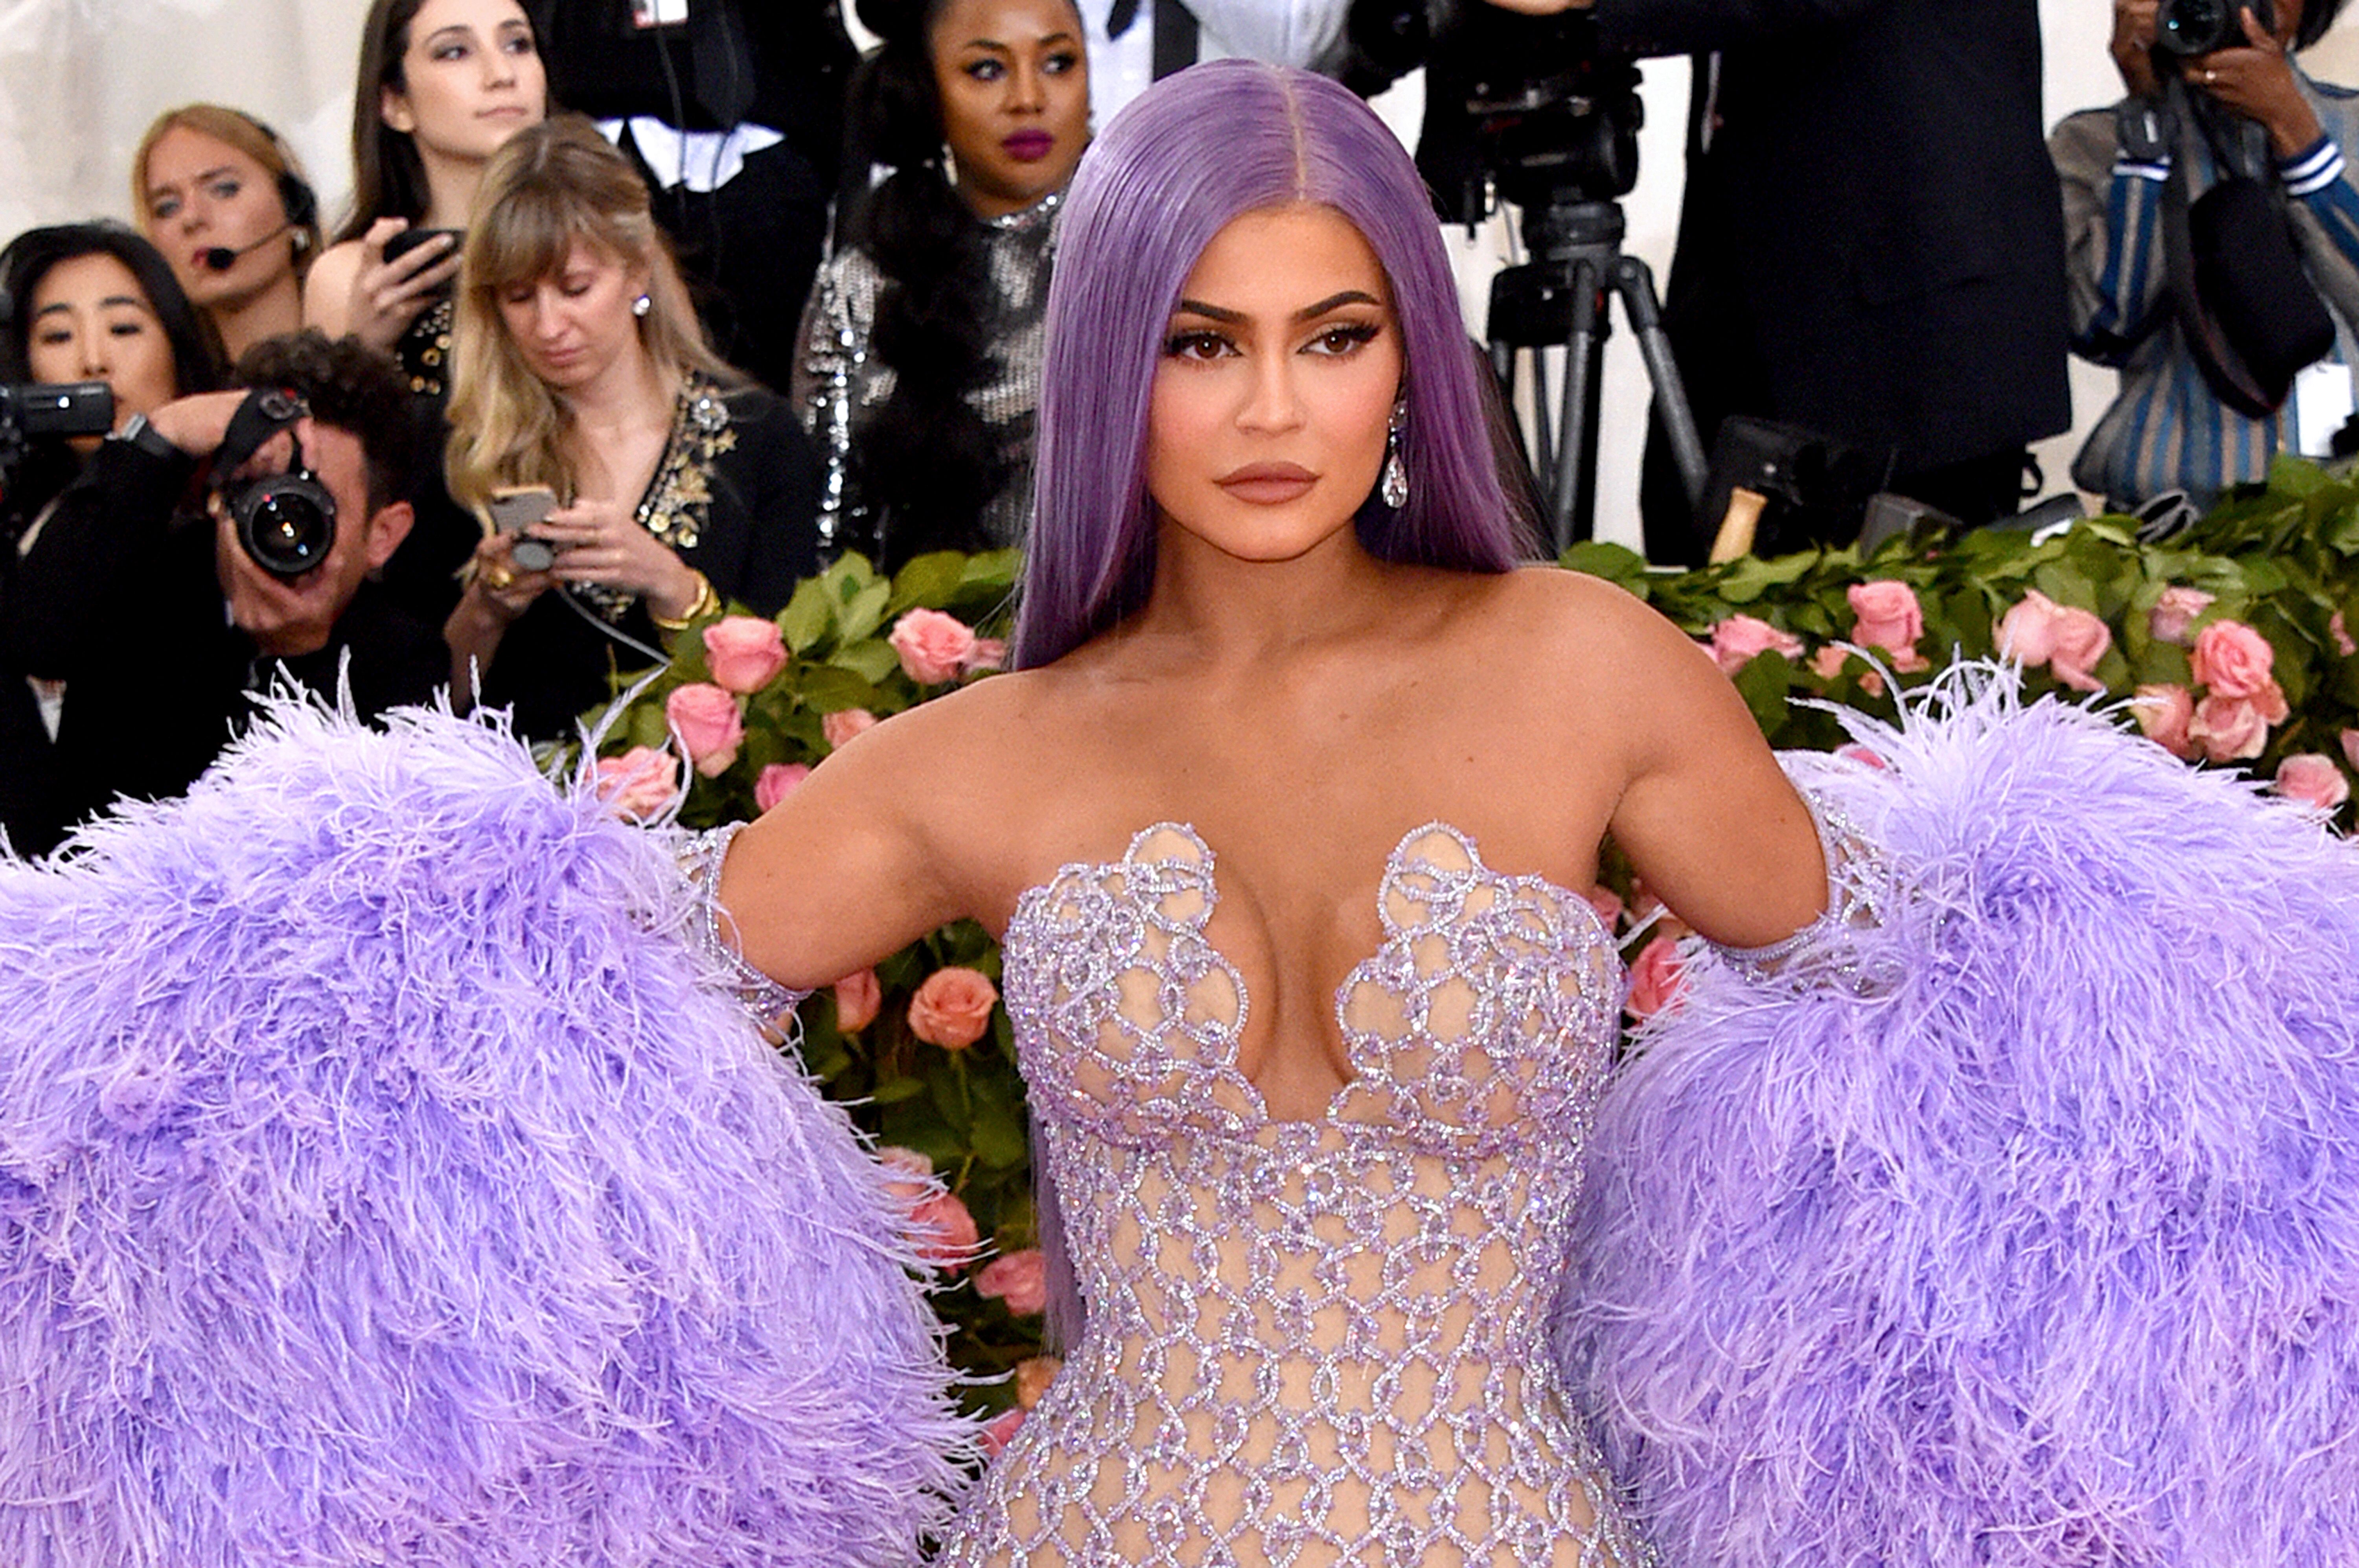 Kylie Jenner at the 2019 MET Gala/ Source: Getty Images